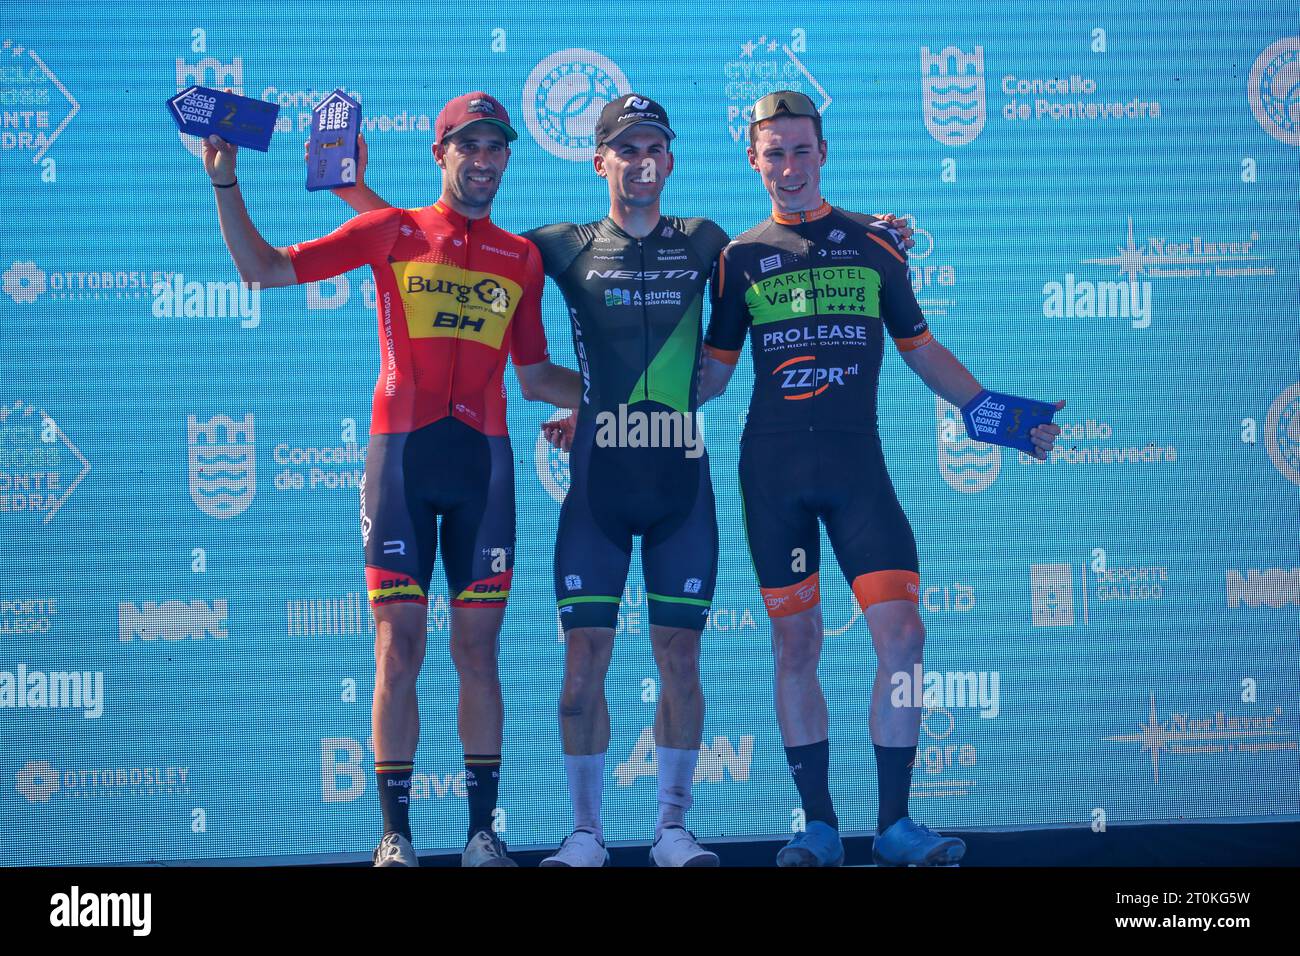 Pontevedra, Spain. 07th Oct, 2023. The race podium with Kevin Suárez, Felipe Orts (L) and Jens Dekker (R) during the men's elite event of the Gran Premio Cidade de Pontevedra 2023, on October 07, 2023, in Pontevedra, Spain. (Photo by Alberto Brevers/Pacific Press) Credit: Pacific Press Media Production Corp./Alamy Live News Stock Photo